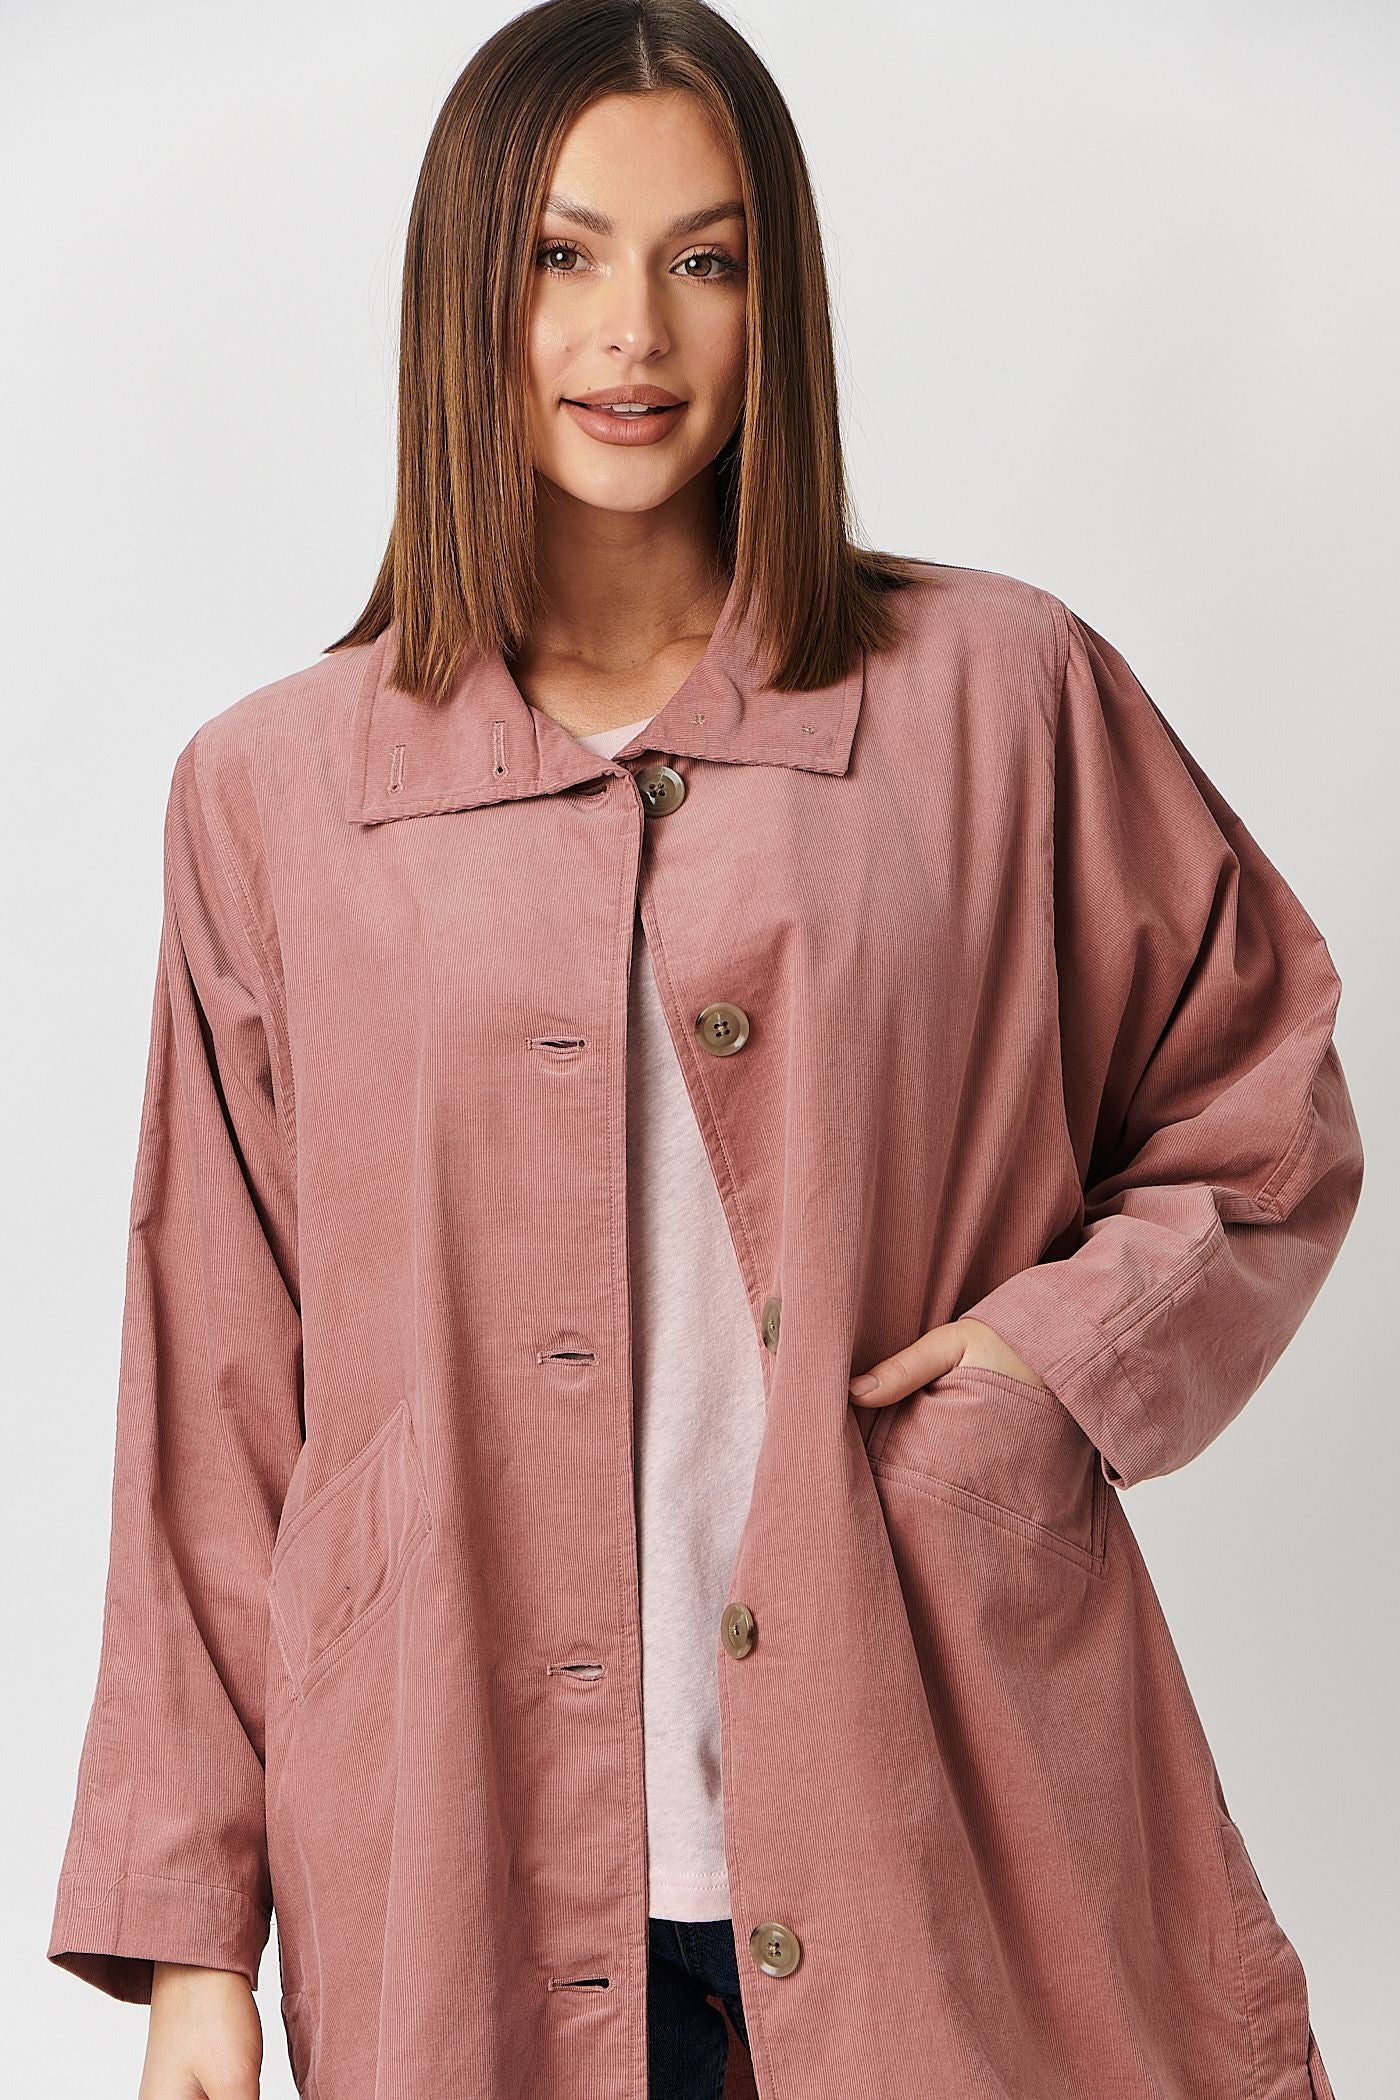 Naturals by O & J Pin whale Cord Coat in Cameo